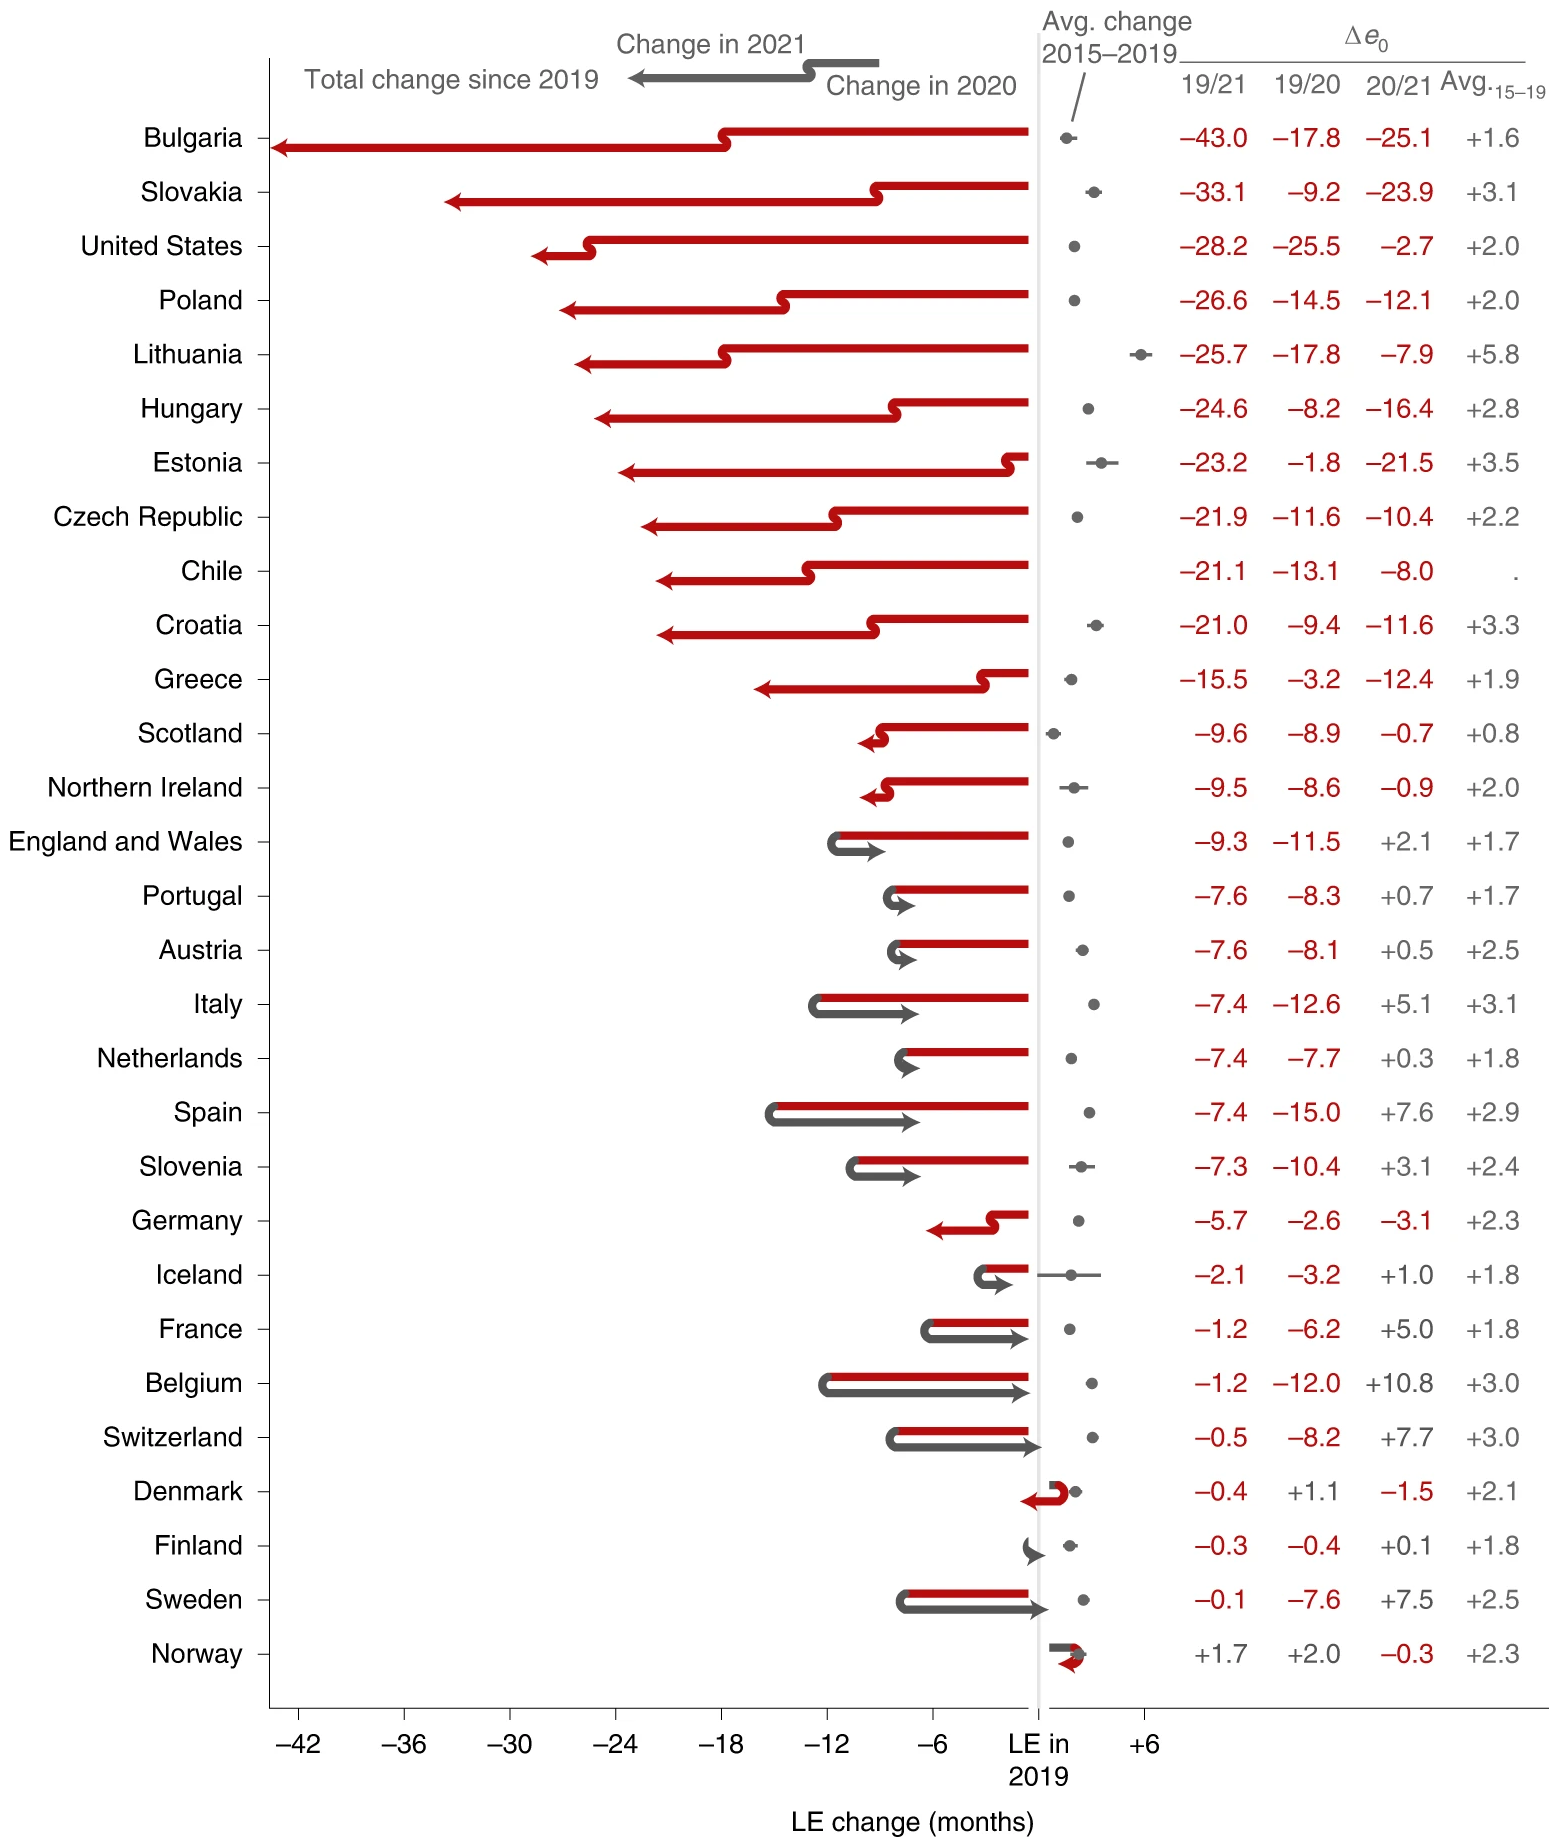 Life expectancy (LE) changes in 2019-2020 and 2020-2021 across countries. The countries are ordered by increasing cumulative LE losses since 2019. The two line segments indicate the annual changes in LE in 2020 and 2021. Red segments to the left indicate an LE drop, while grey arrows to the right indicate a rise in LE. The position of the arrowhead indicates the total change in LE from 2019 through 2021. The grey dots and lines indicate the average annual LE changes over the years 2015 through 2019 along with 95% CIs. Δe0 marks the change in period LE over the designated period. Graphic: Schöley, et al., 2022 / Nature Human Behaviour